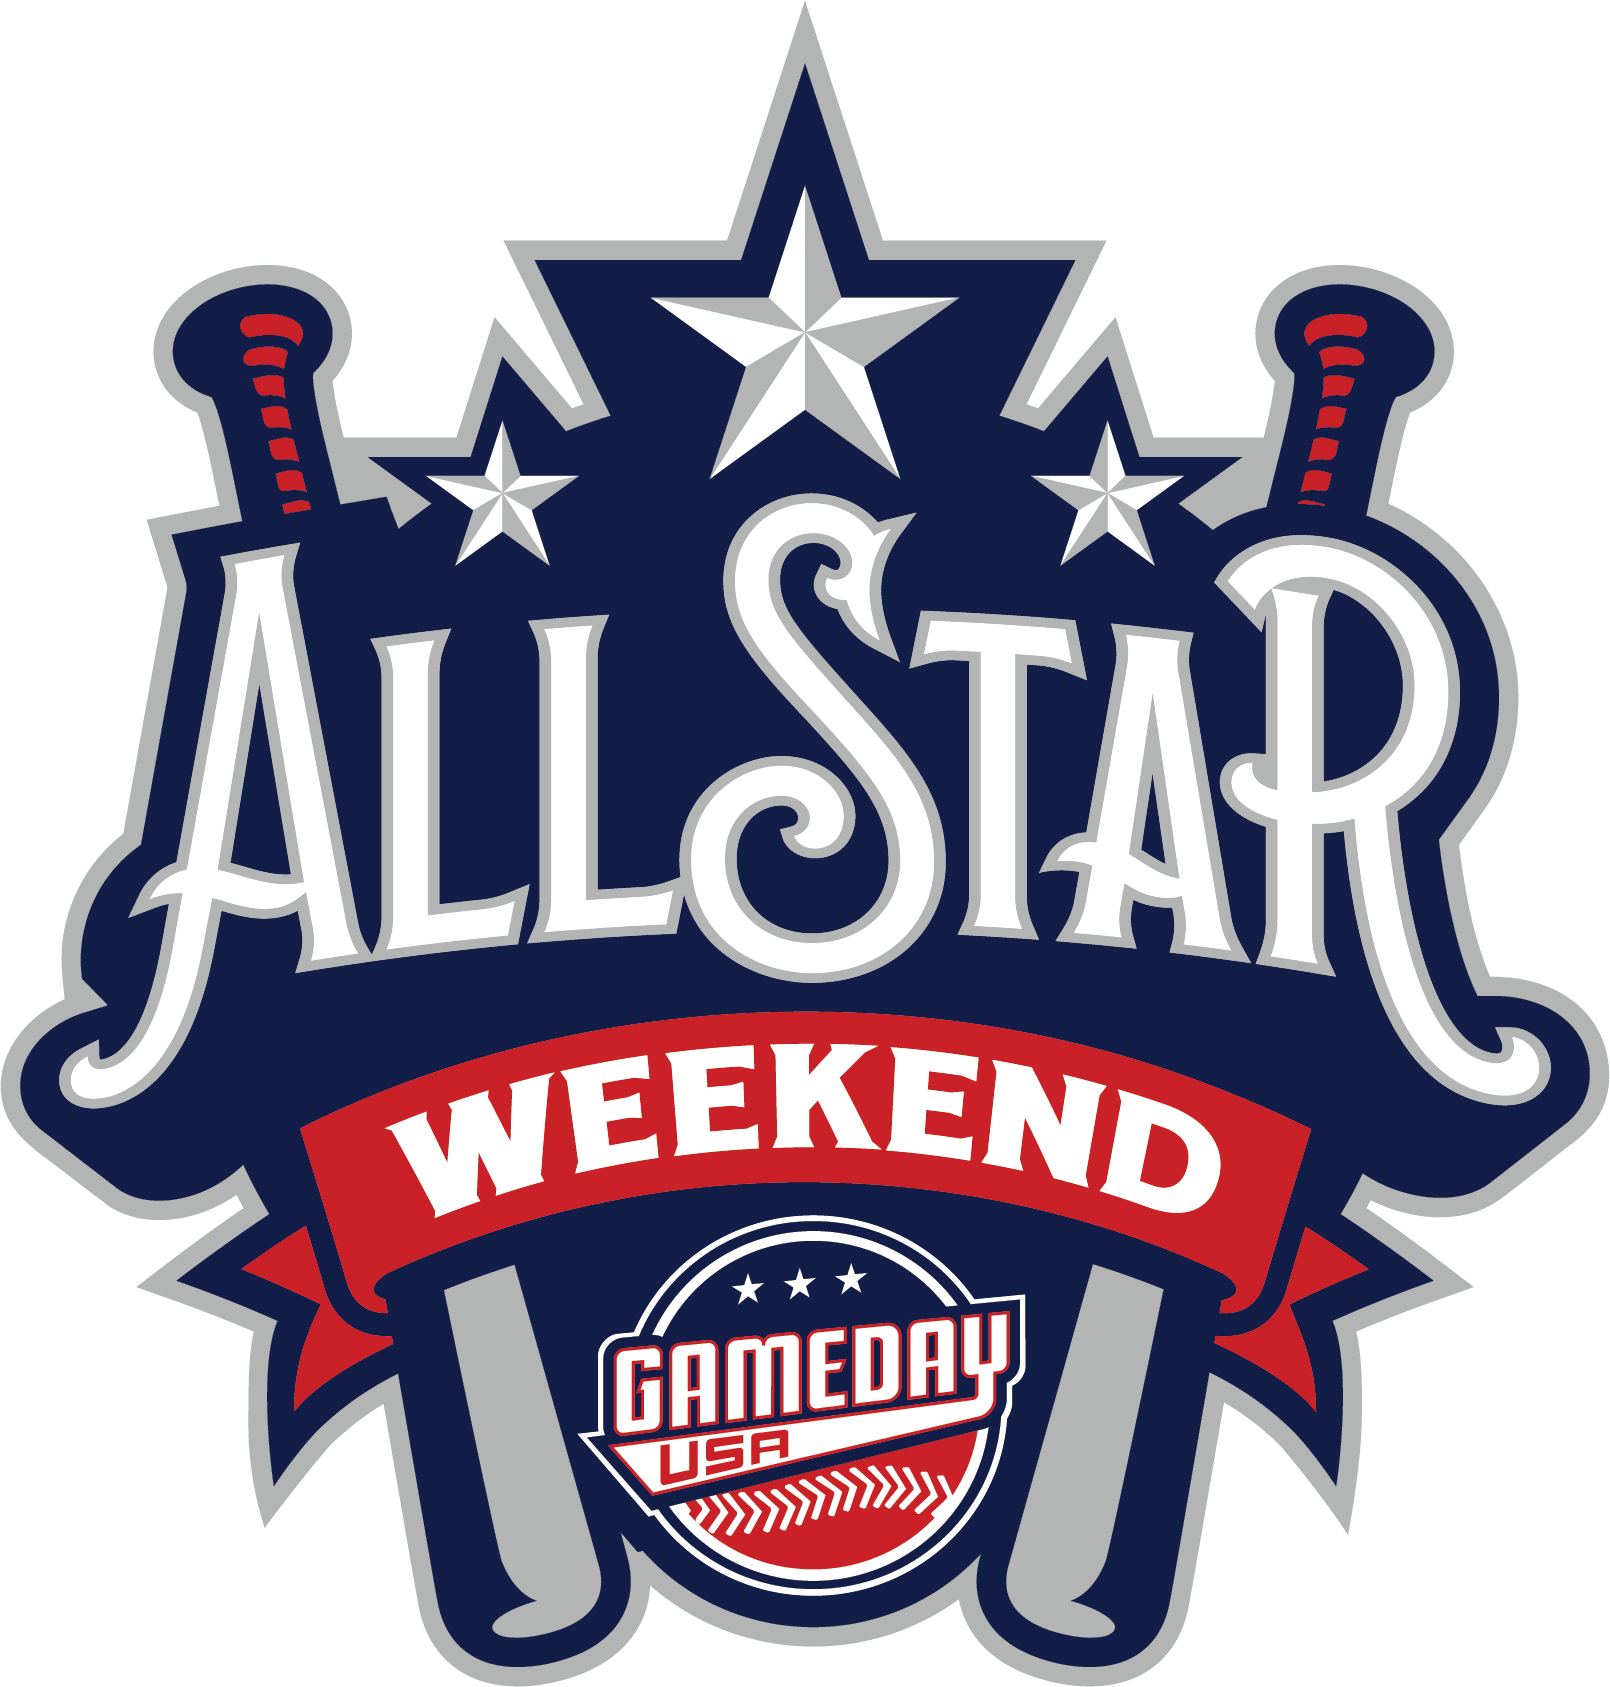 ALL-STAR WEEKEND - CROWN POINT